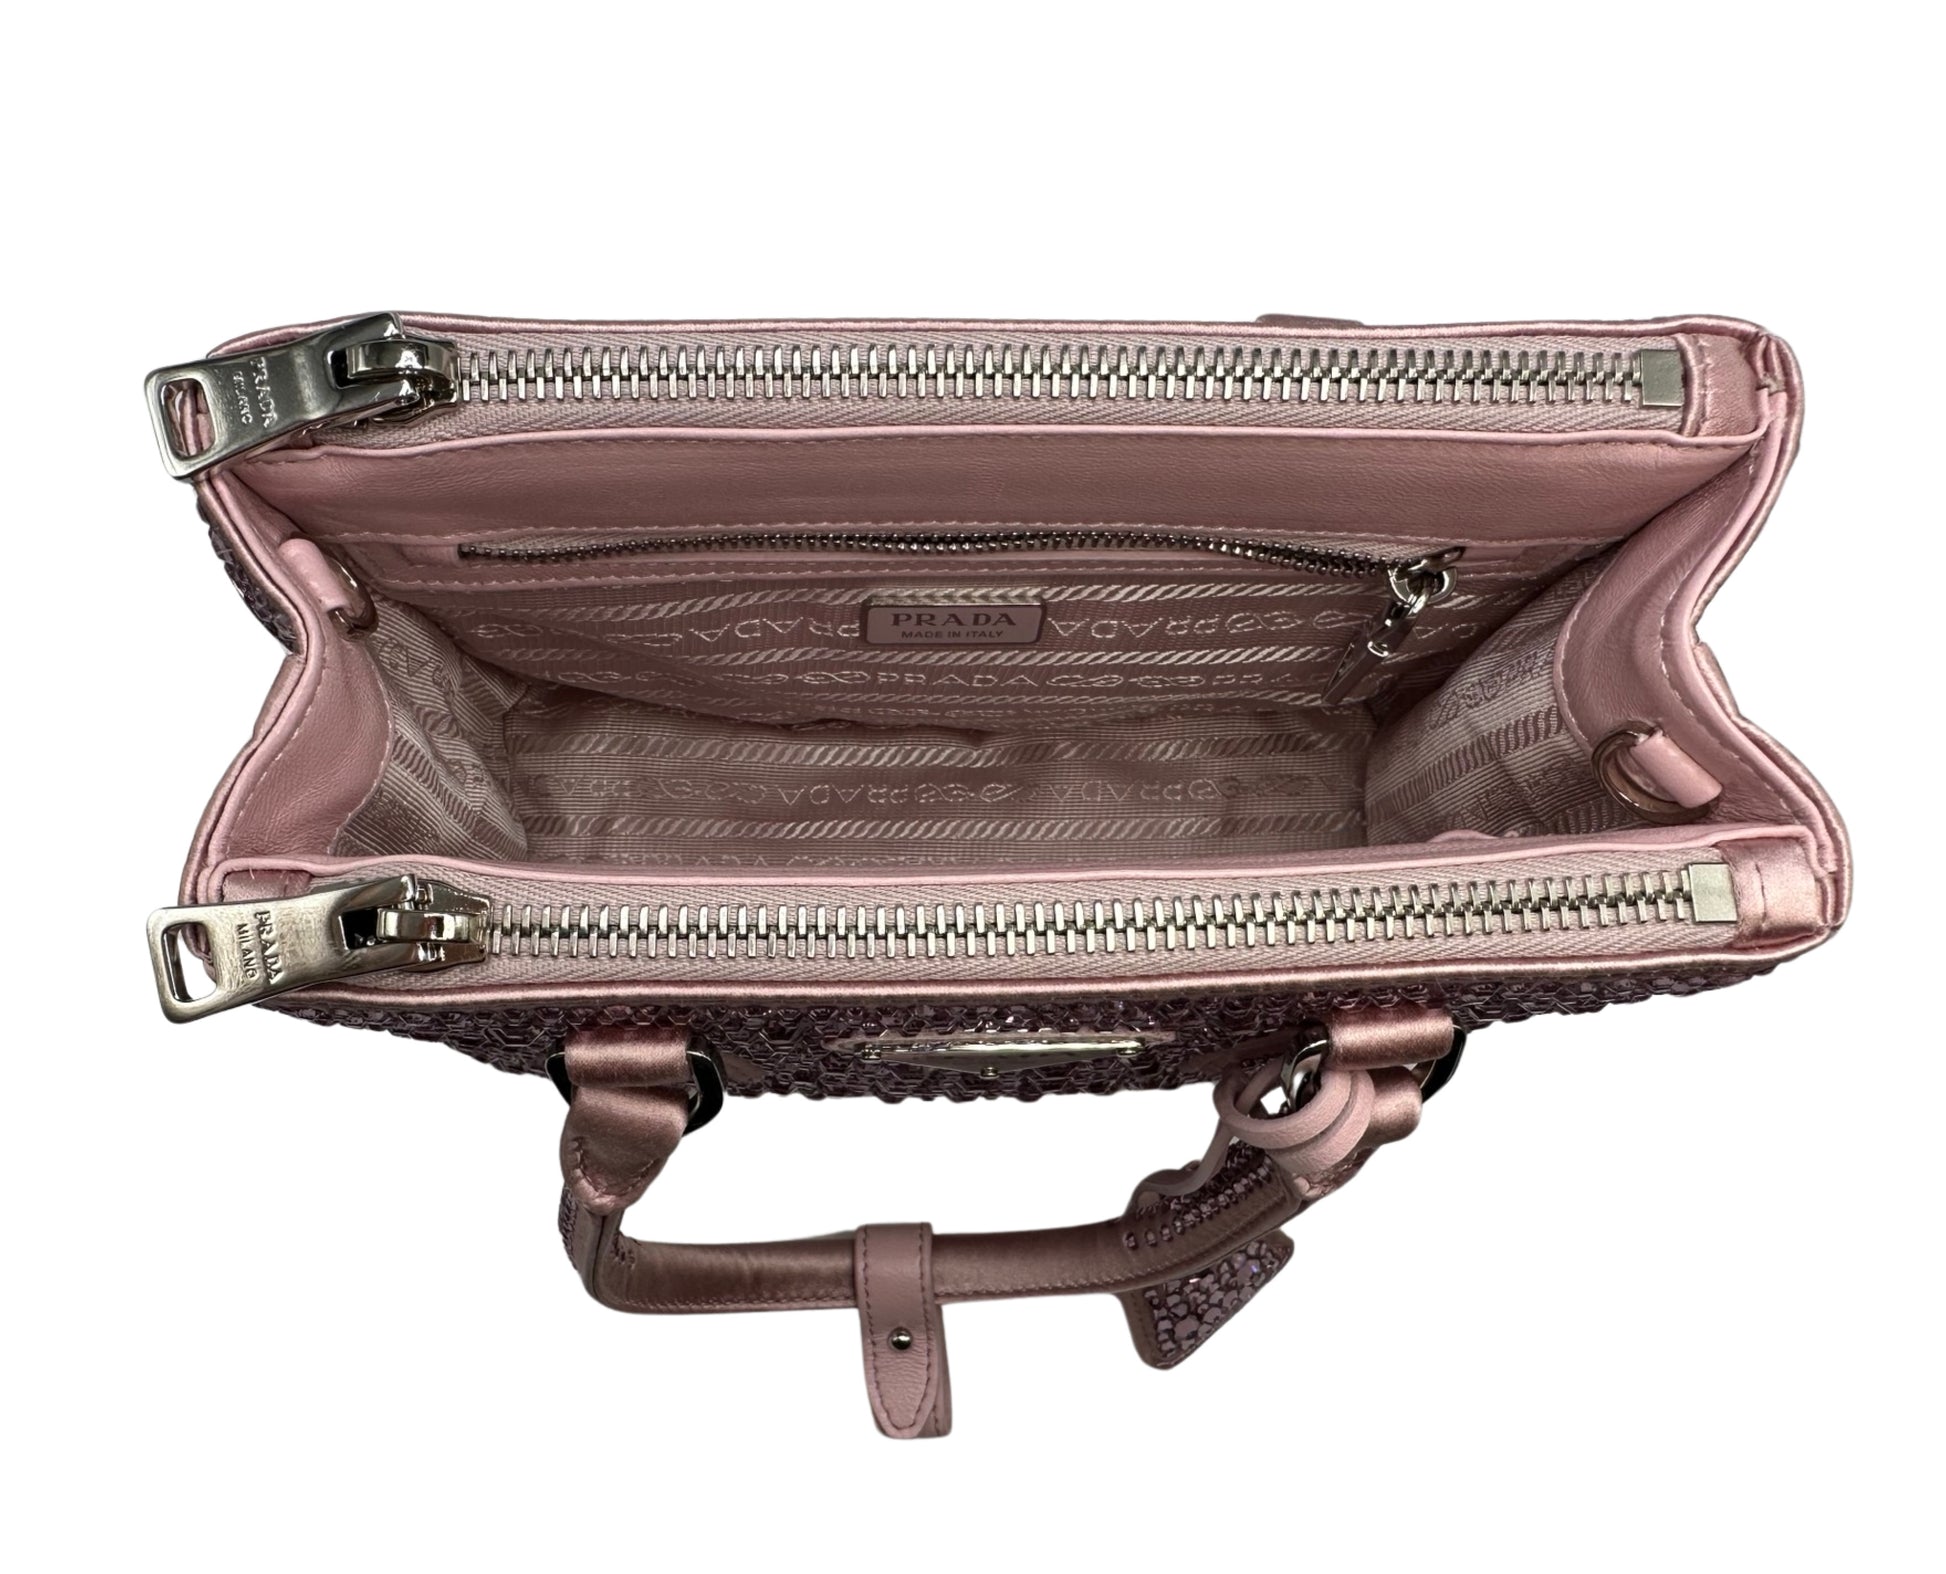 Pictured: The inside of the Prada Galleria Crystal mini satin bag in pink with the pocket zippers closed. There are 2 zipper pockets on the top of the bag on each side. There is a zipper pocket on the inside of the bag. No imperfections.